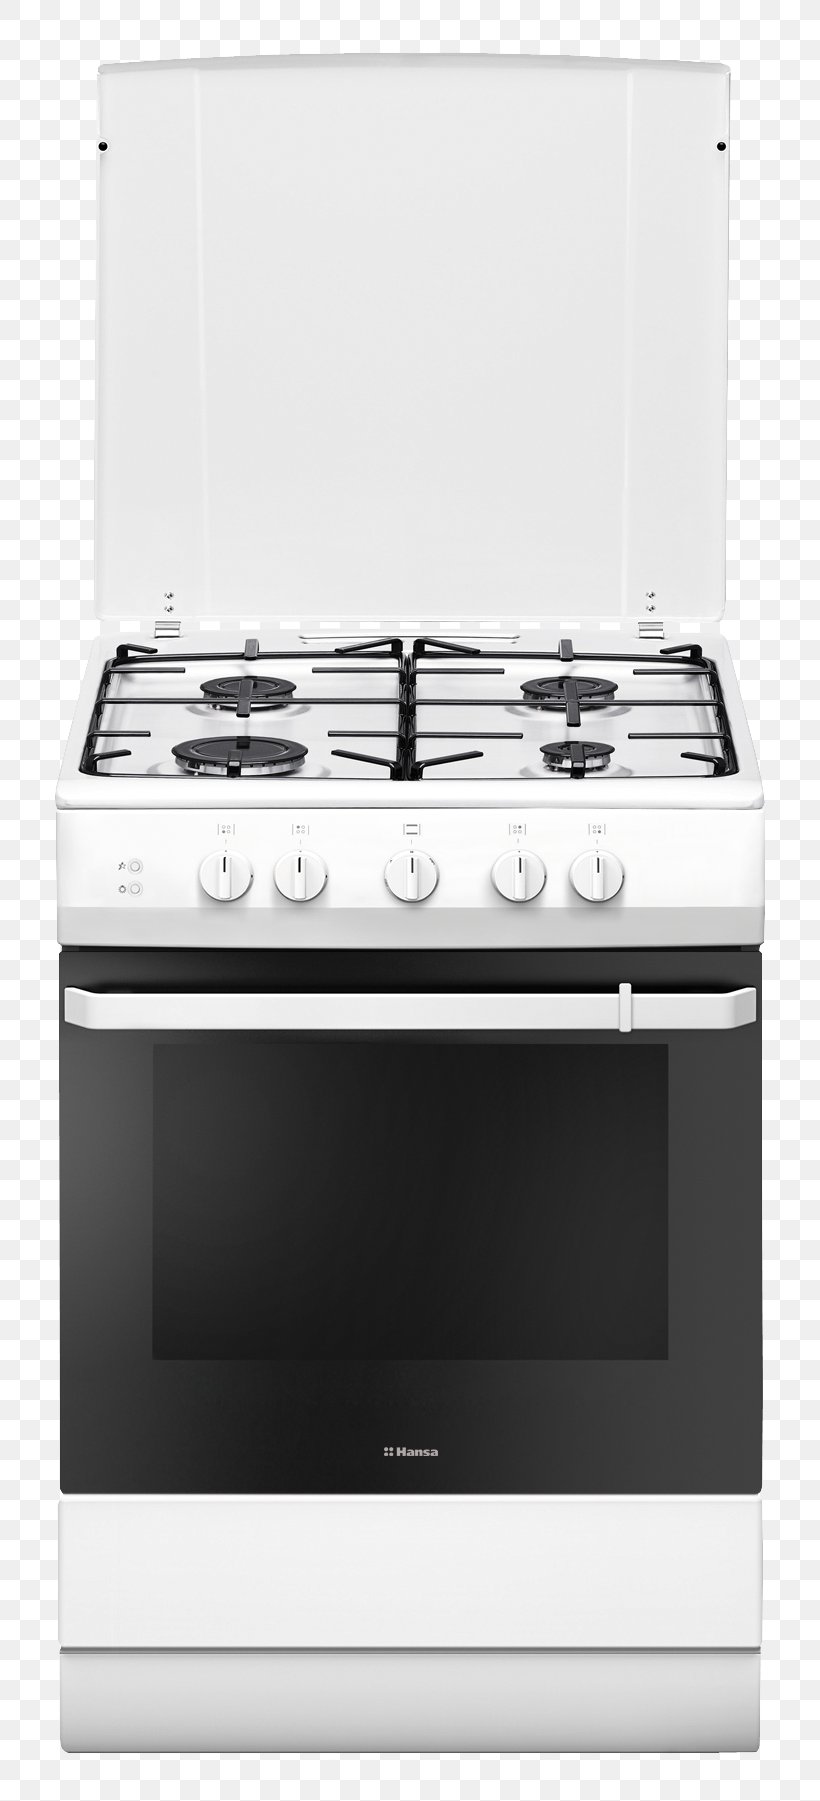 Cooking Ranges Kitchen Home Appliance Major Appliance Refrigerator, PNG, 800x1801px, Cooking Ranges, Cleaning, Cooker, Dishwasher, Electric Cooker Download Free